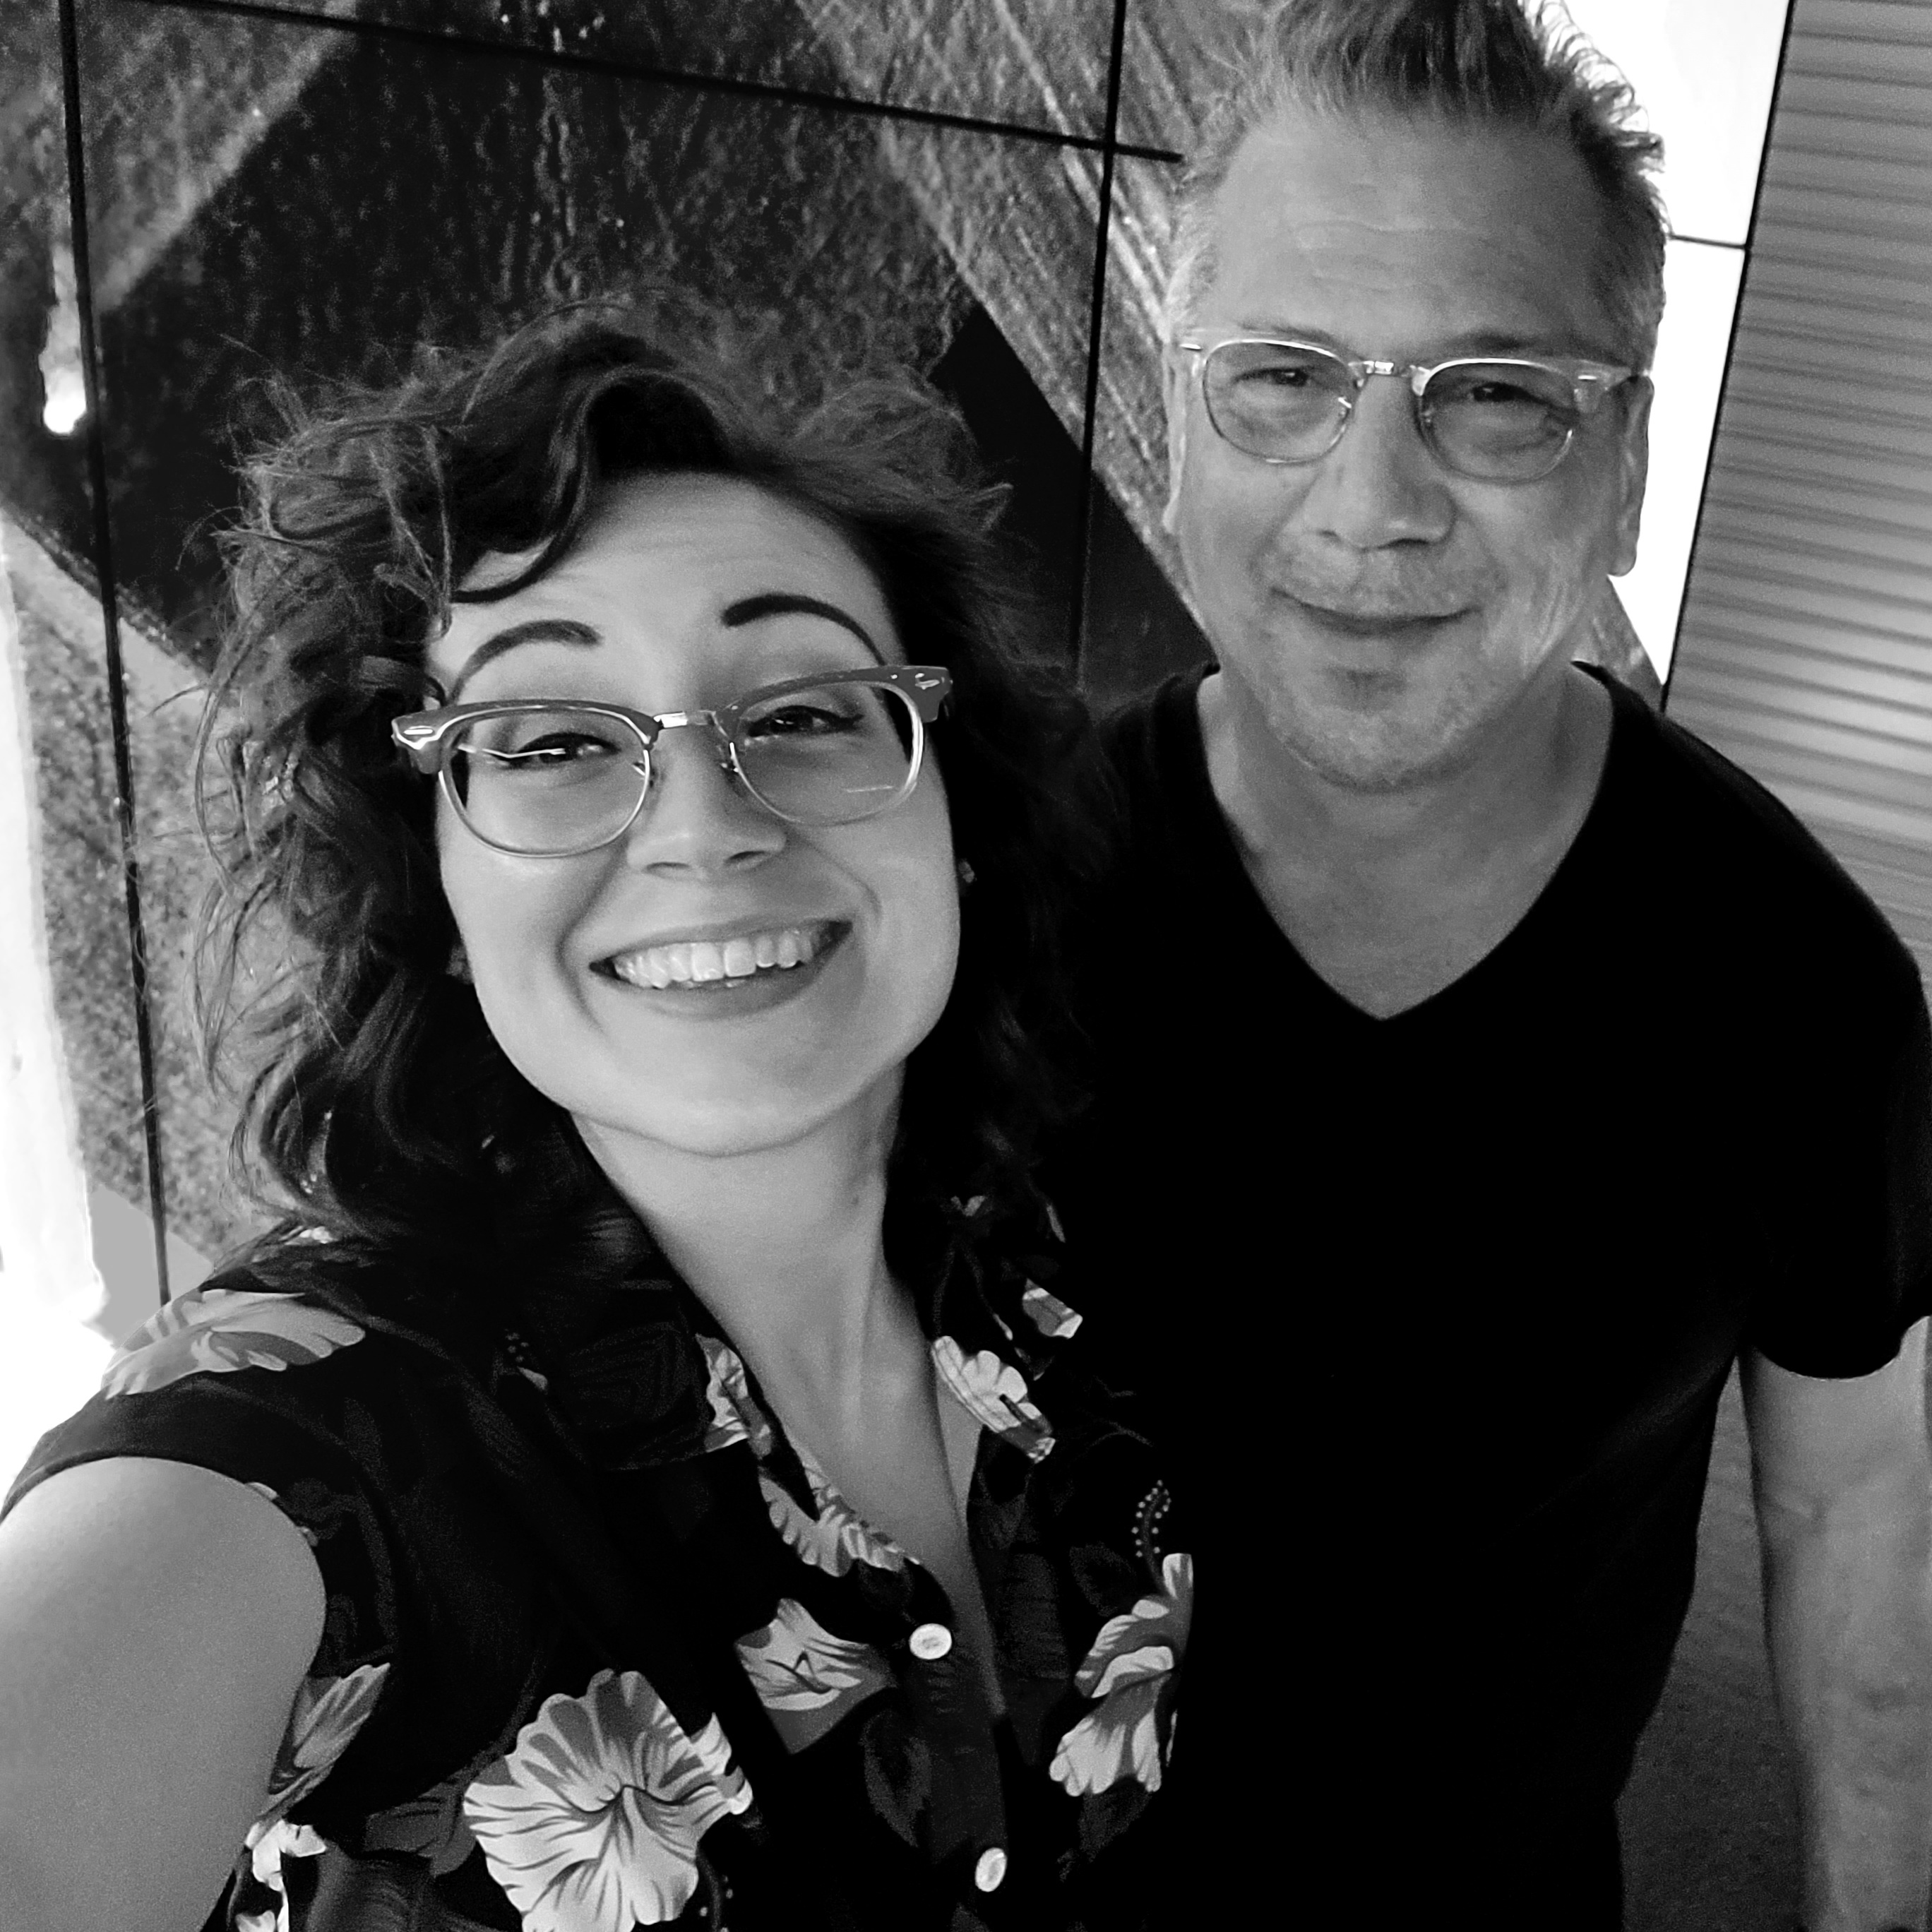 A selfie of Brenna and her husband David. Brenna is a white woman in her thirties with wavy hair and glasses. David is a white man in his fifties with short hair and glasses. They are smiling and standing in front of an LED wall.